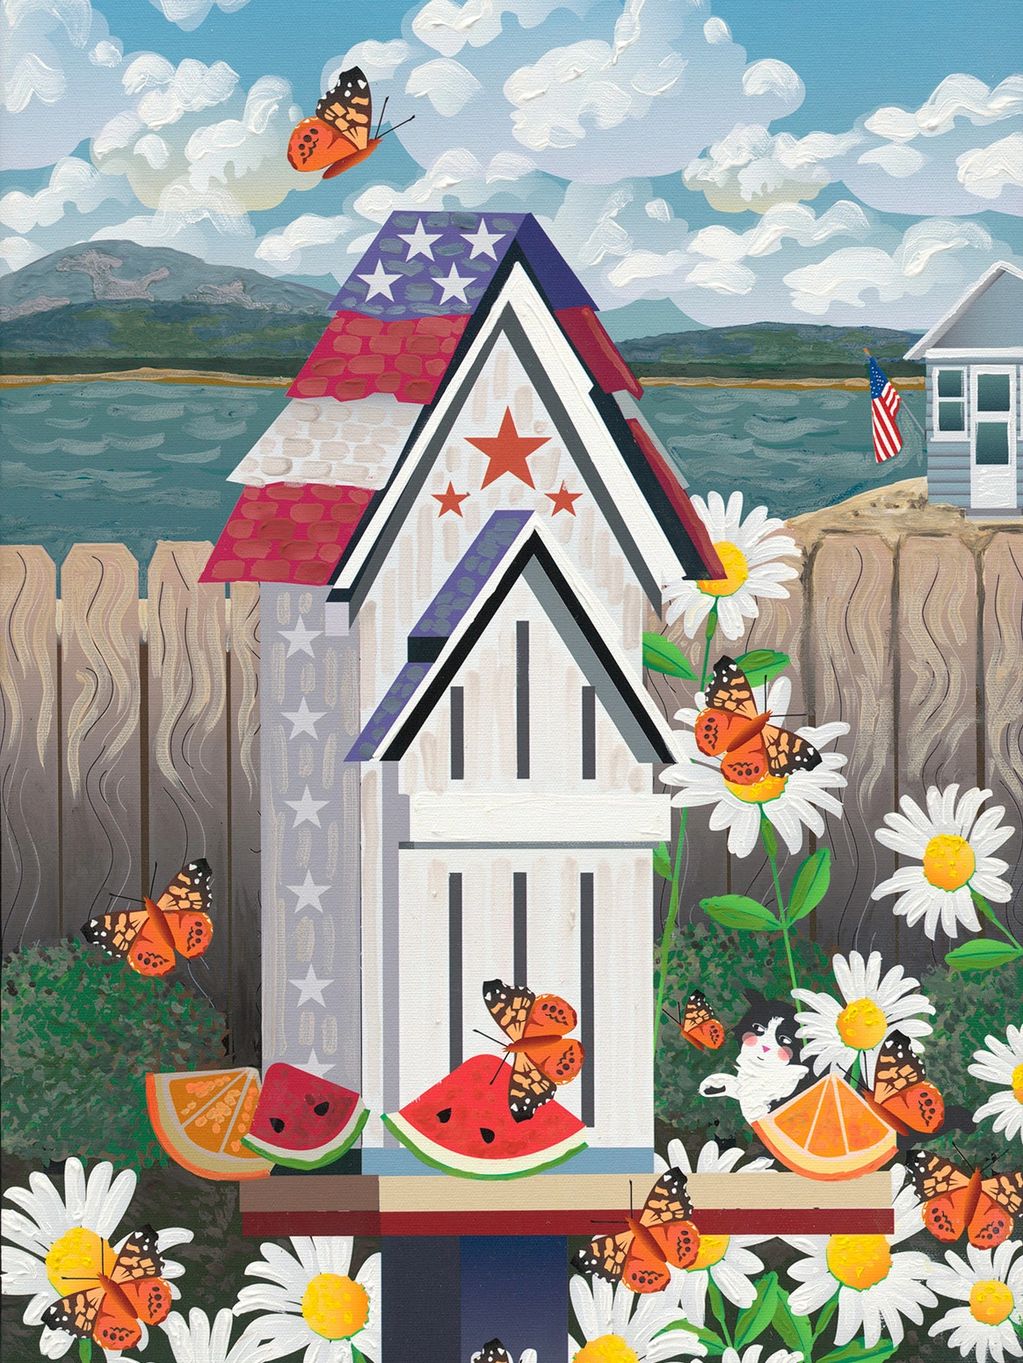 Summer butterfly house in beach ocean daisy garden with watermelon and orange slices.